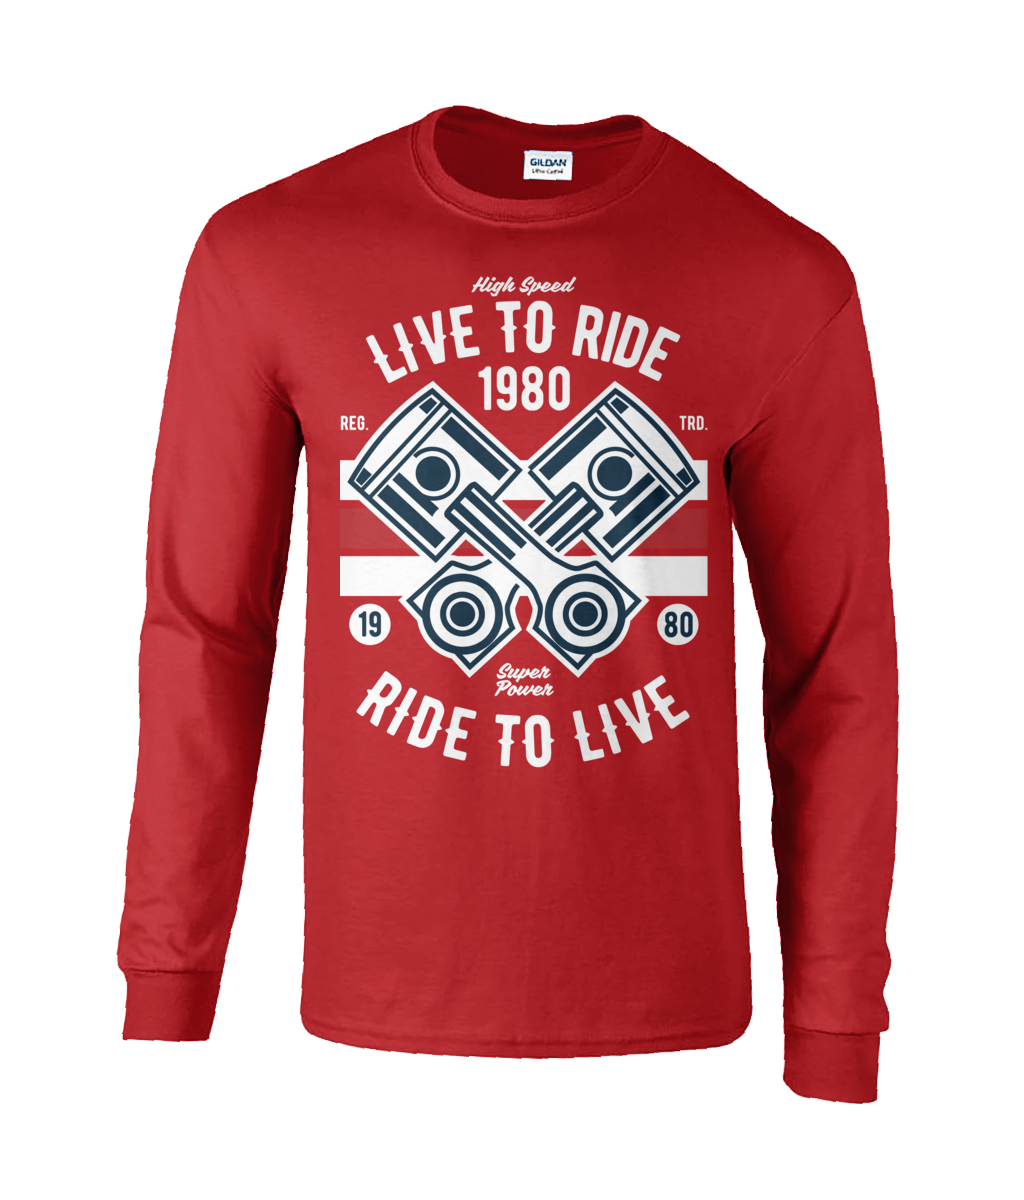 Live To Ride 1980 – Ultra Cotton Long Sleeve T-shirt